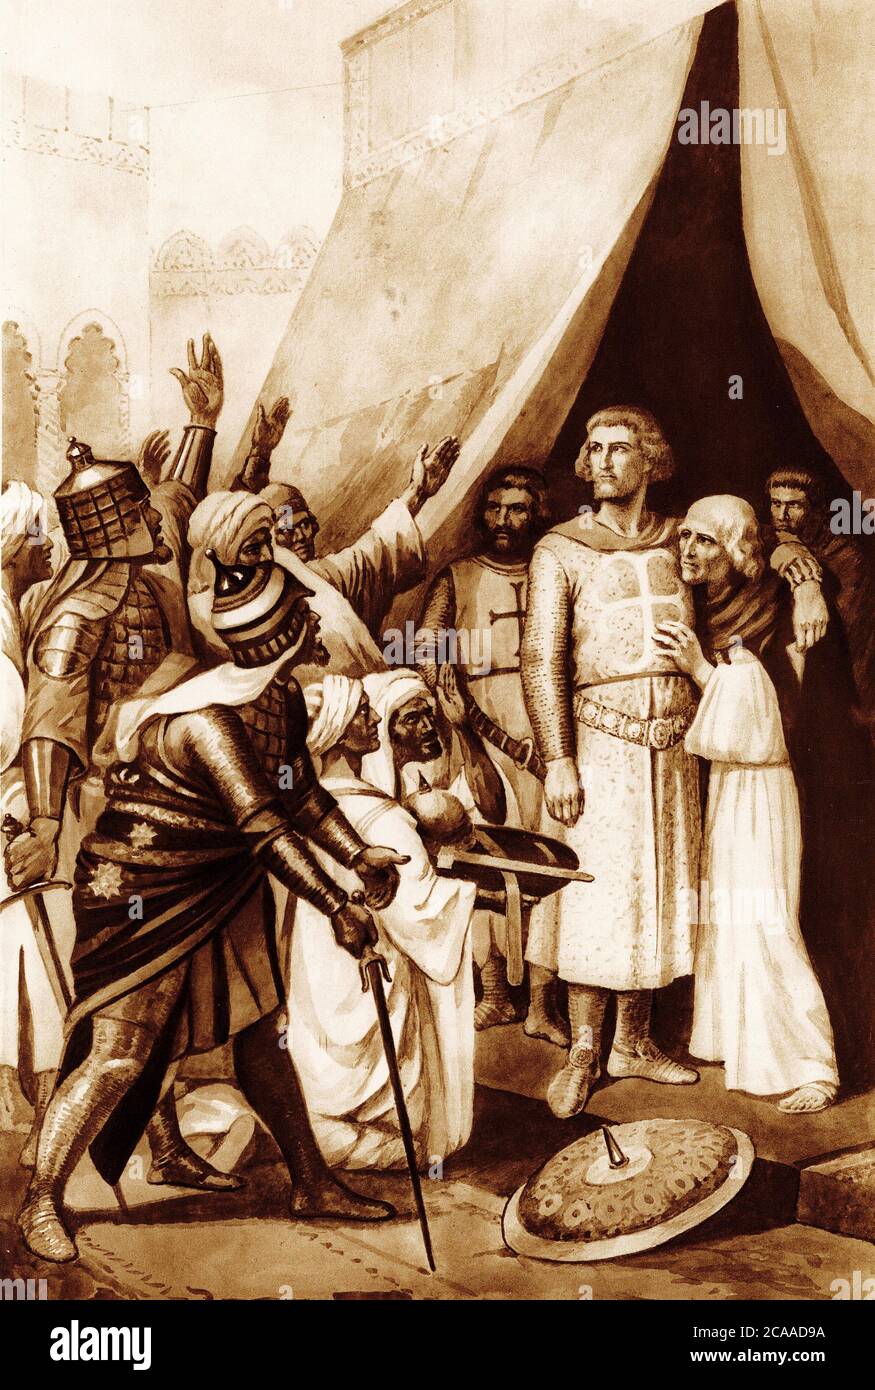 illustration of Louis IX, king of France,  taken prisoner at Mansourah on 5 April 1250, from a set of school posters used for social studies, c 1930 Stock Photo